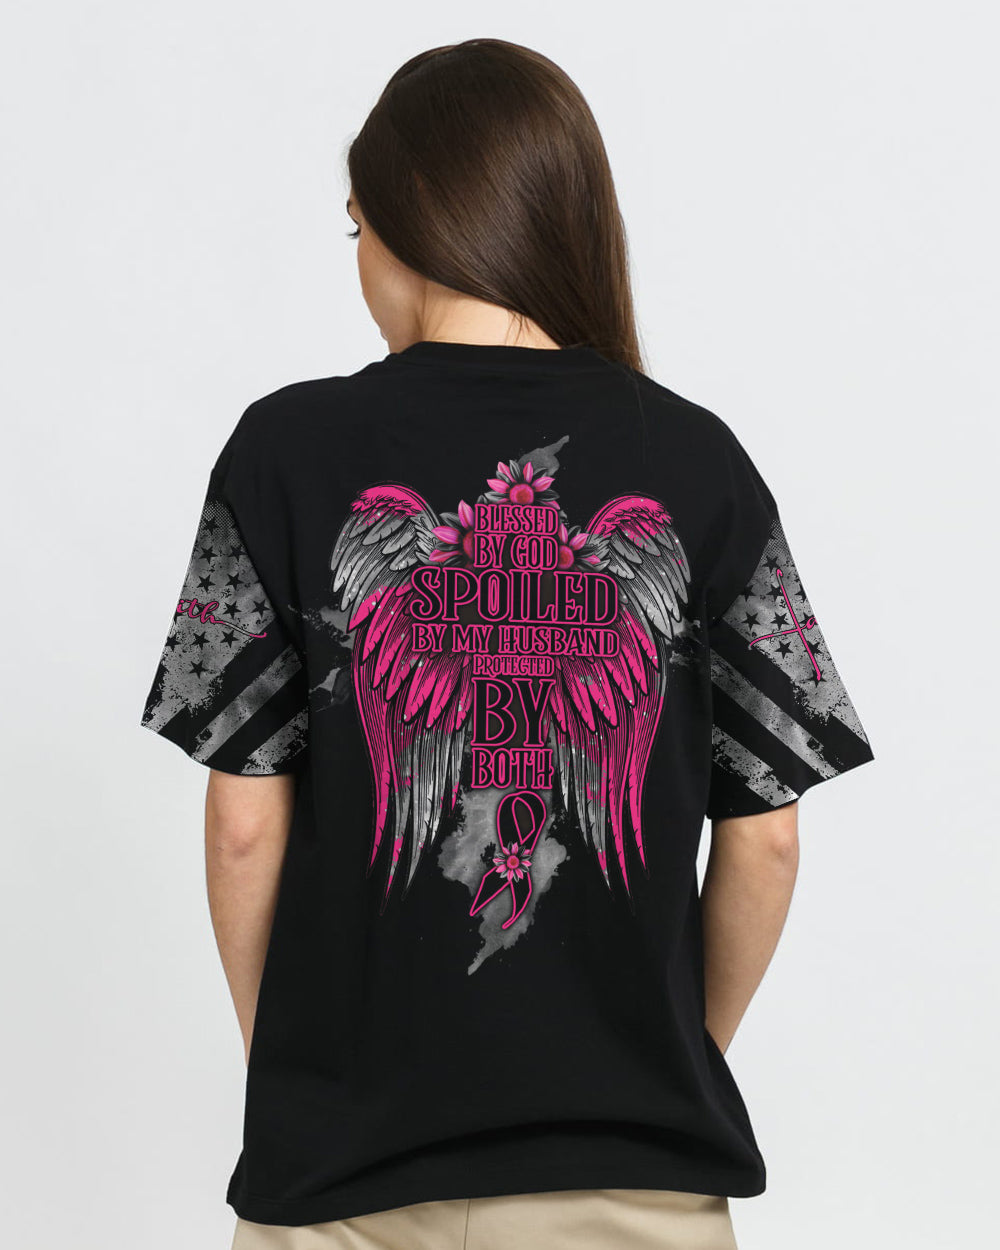 Blessed By God Spoiled By My Husband Women's Breast Cancer Awareness Tshirt